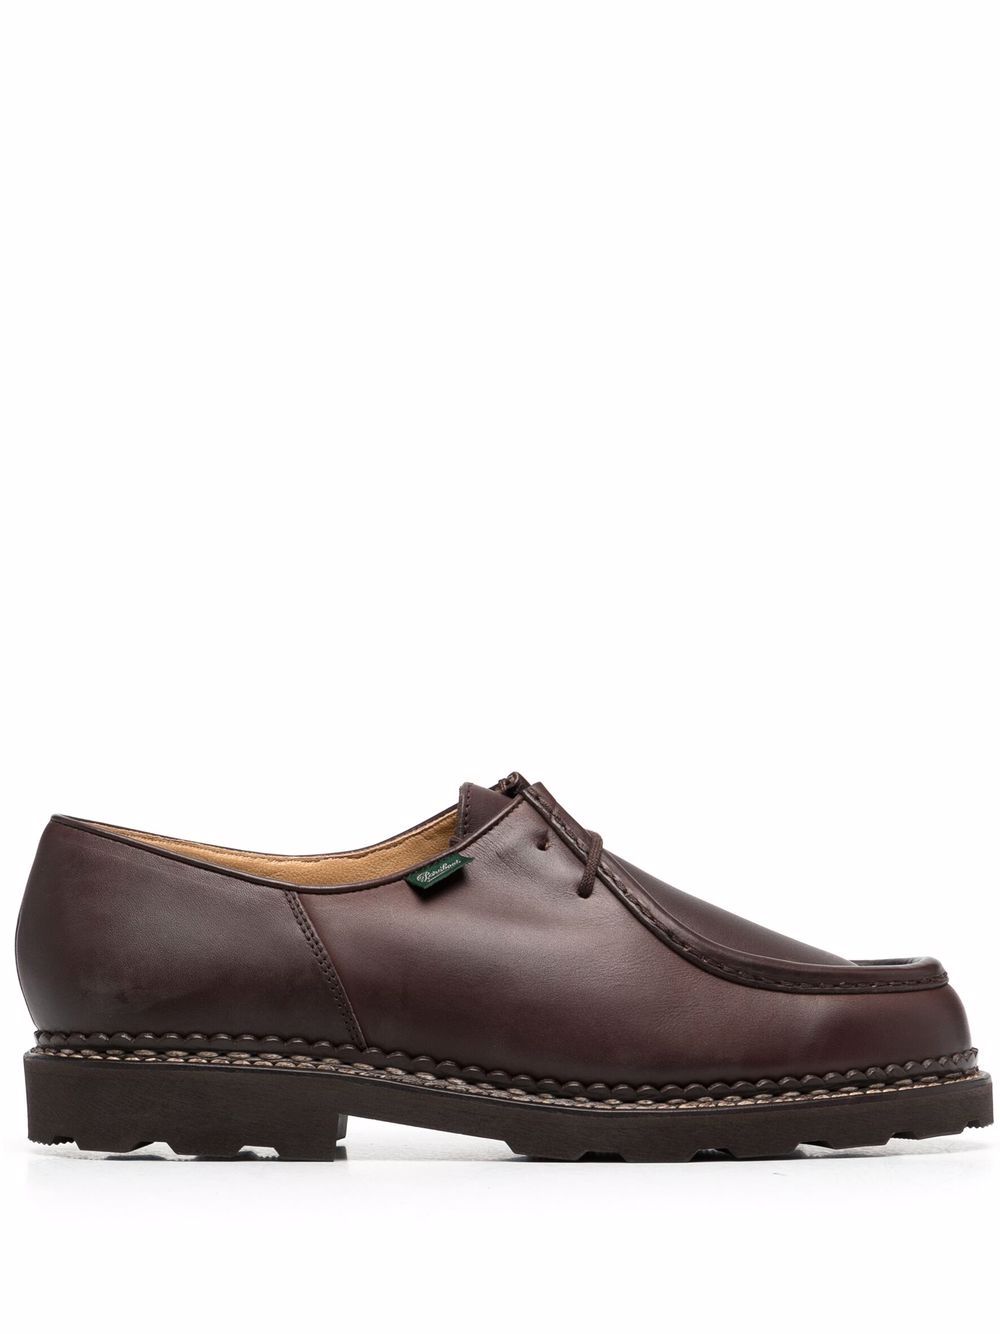 Cafe brown leather Michael leather lace-up shoes